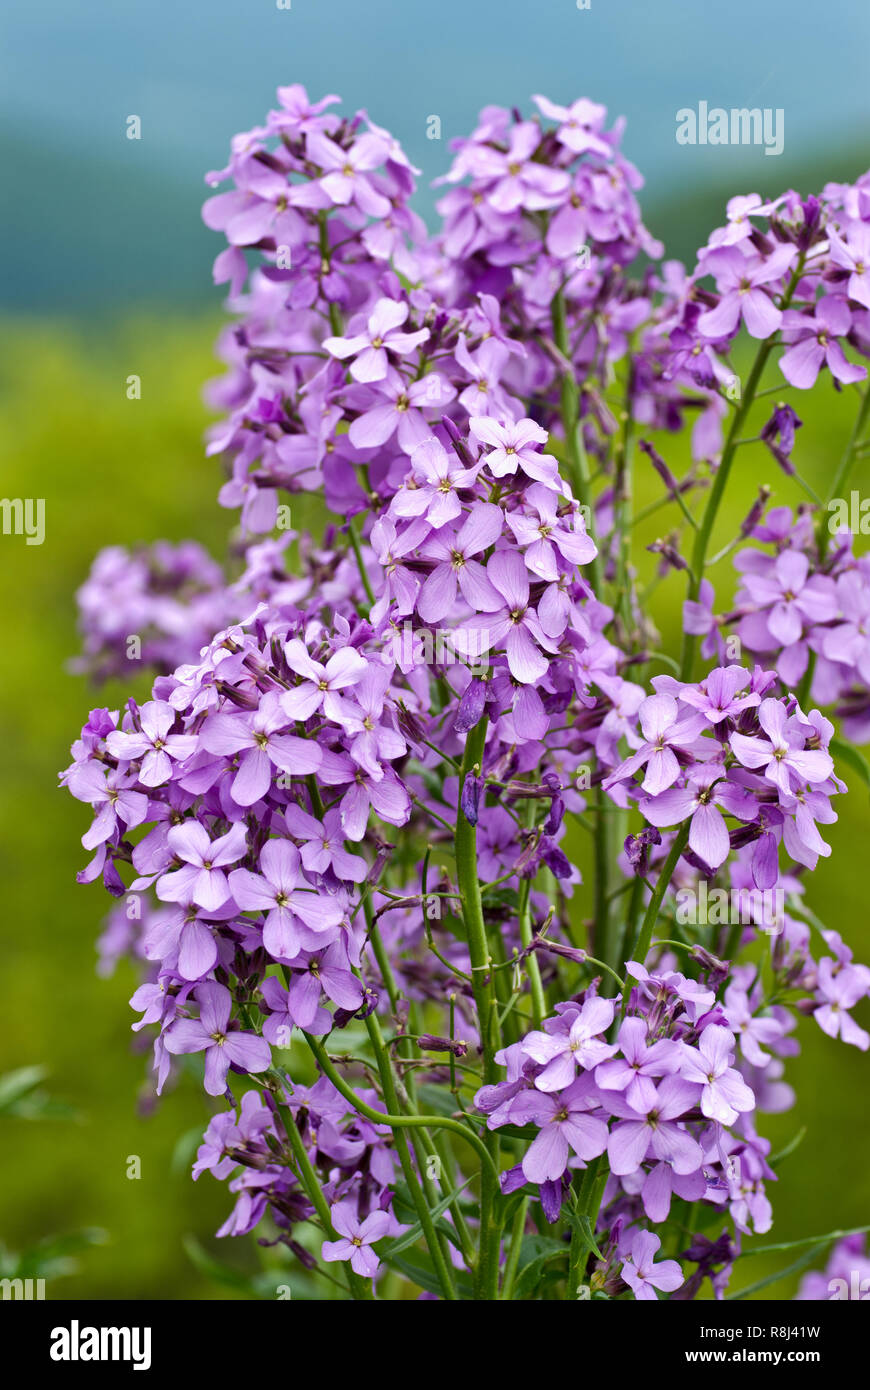 Dame's rocket (Hesperis matronalis) in central Virginia in spring. This beautiful but highly invasive alien plant has established itself throughout No Stock Photo